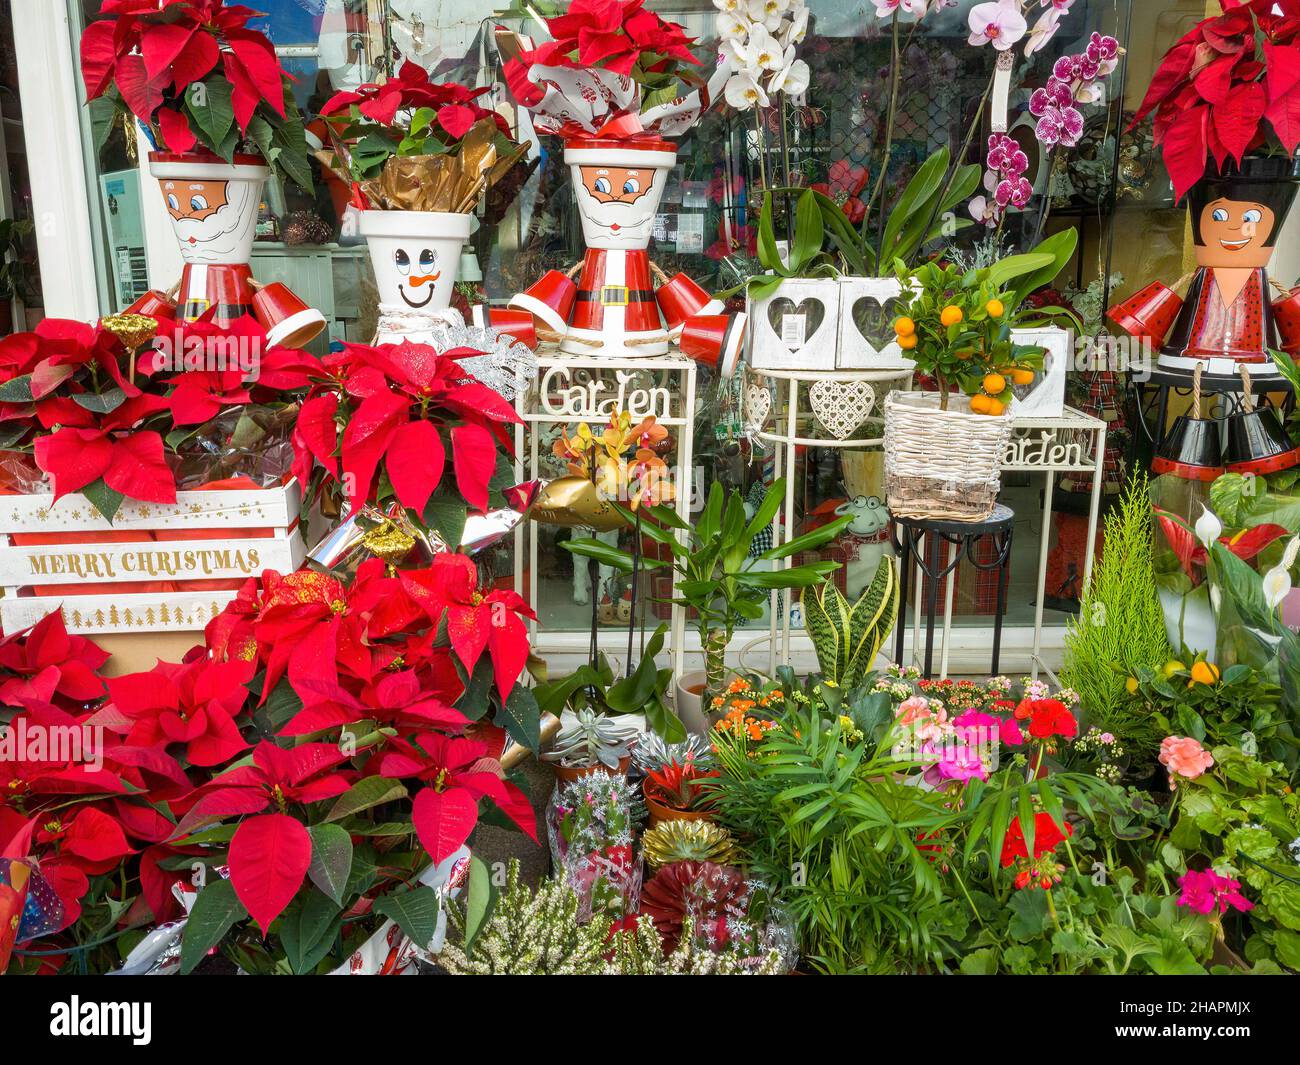 Plants and flowers in pots decorated with Christmas motifs Stock Photo